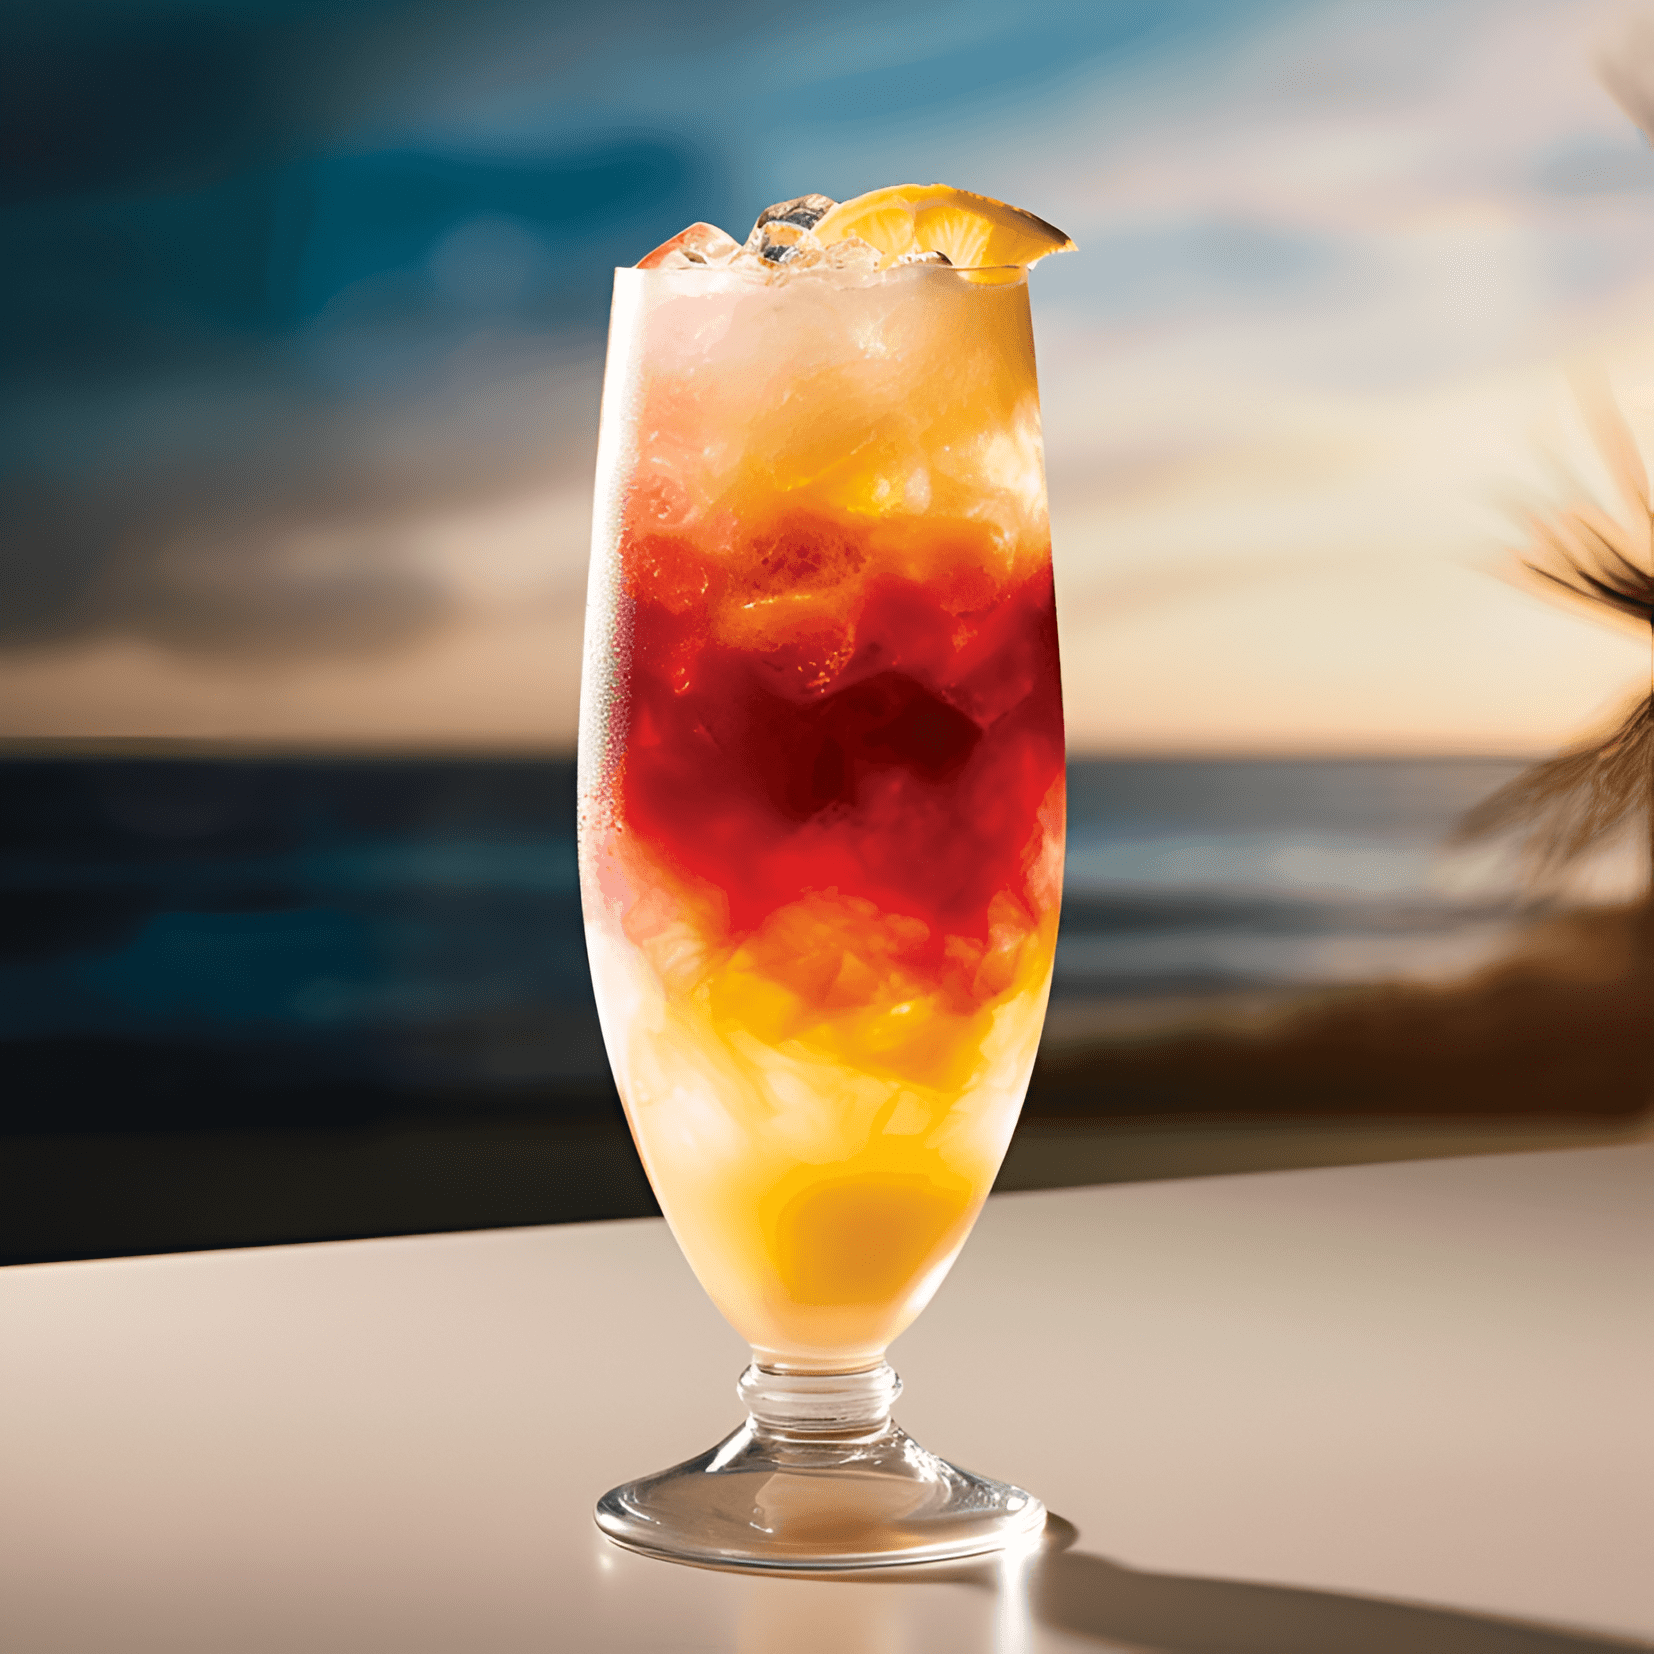 Barracuda Punch Cocktail Recipe - The Barracuda Punch is a delightful combination of sweet, sour, and fruity flavors. The tangy pineapple and orange juices are balanced by the sweetness of the grenadine, while the rum and Galliano add a warm, spicy kick. The overall taste is refreshing, tropical, and slightly exotic.